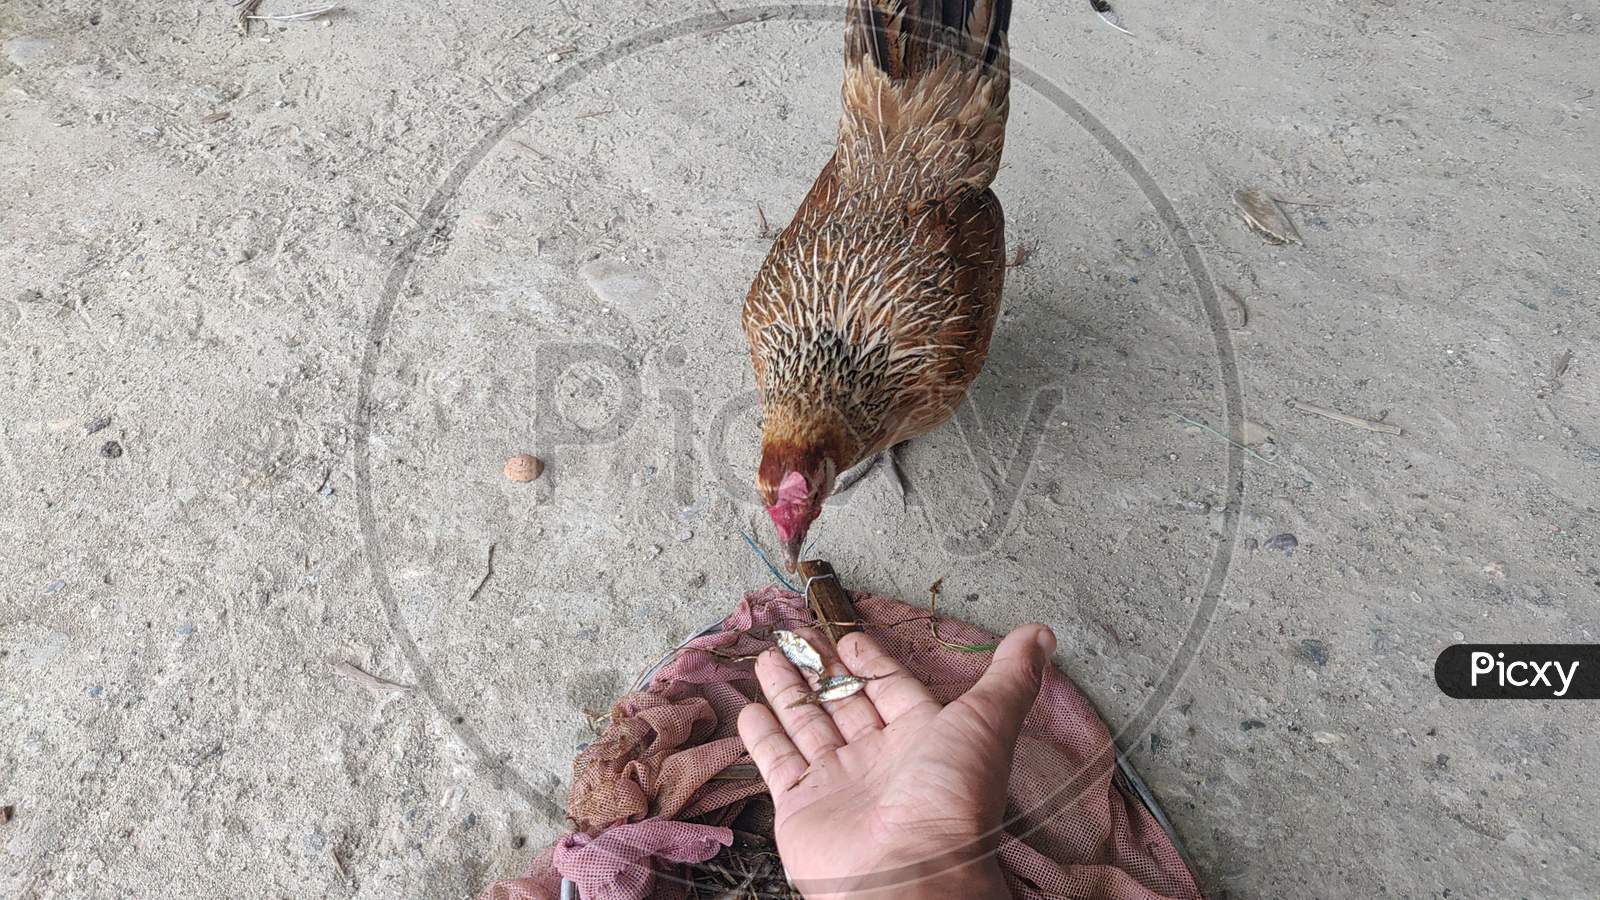 Feeding small fishes to hen by its owner photo